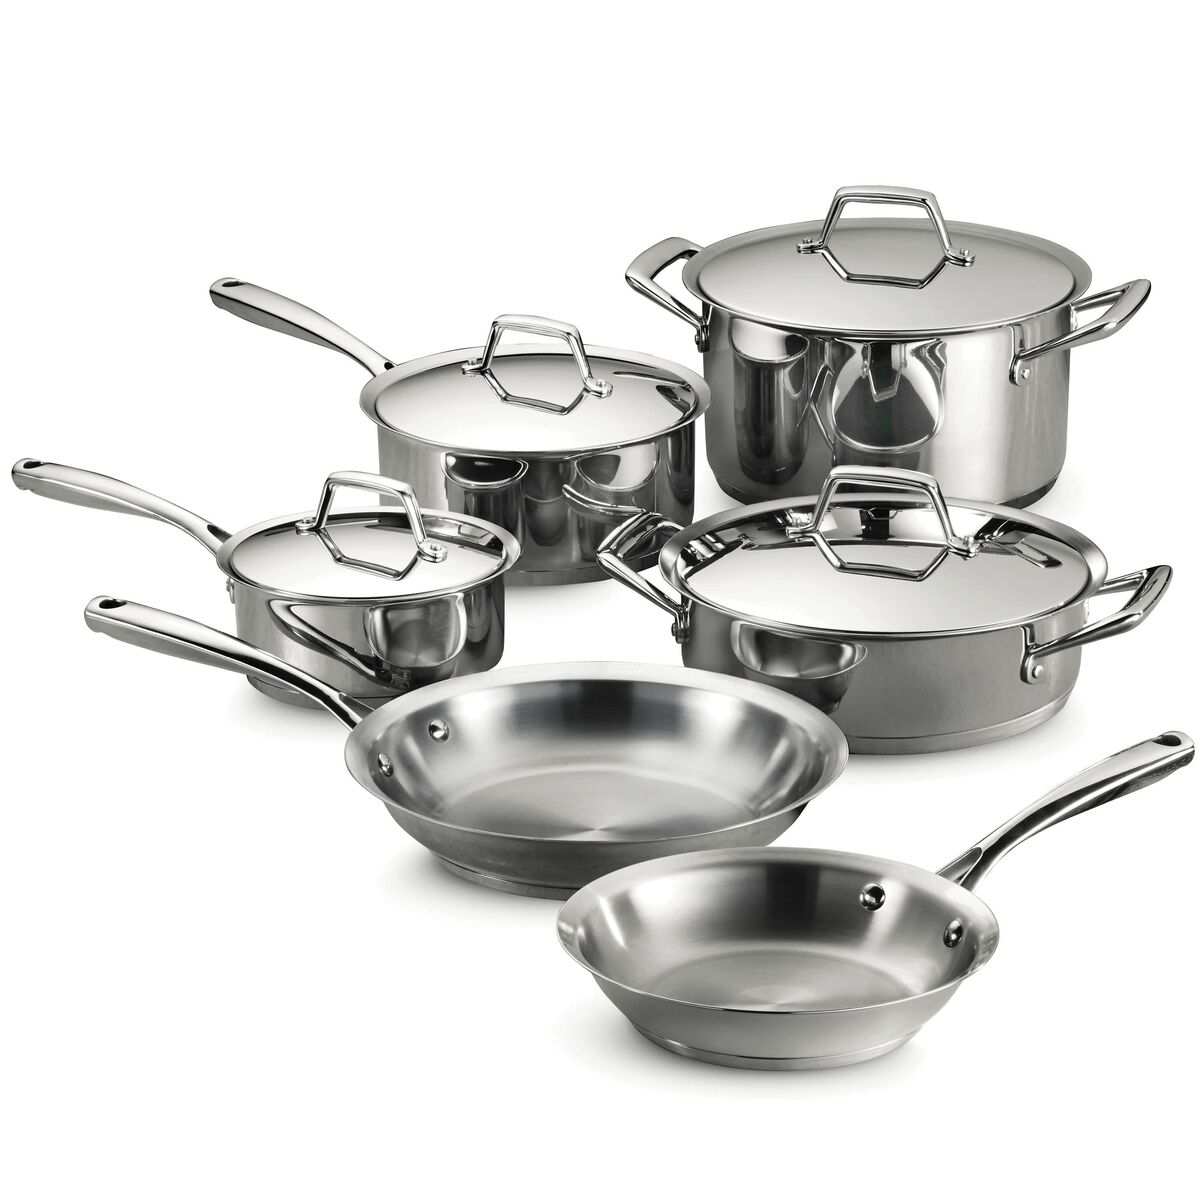  Tramontina PrimaWare 10-Piece Nonstick Cookware Set, Steel Gray  by Tramontina: Home & Kitchen